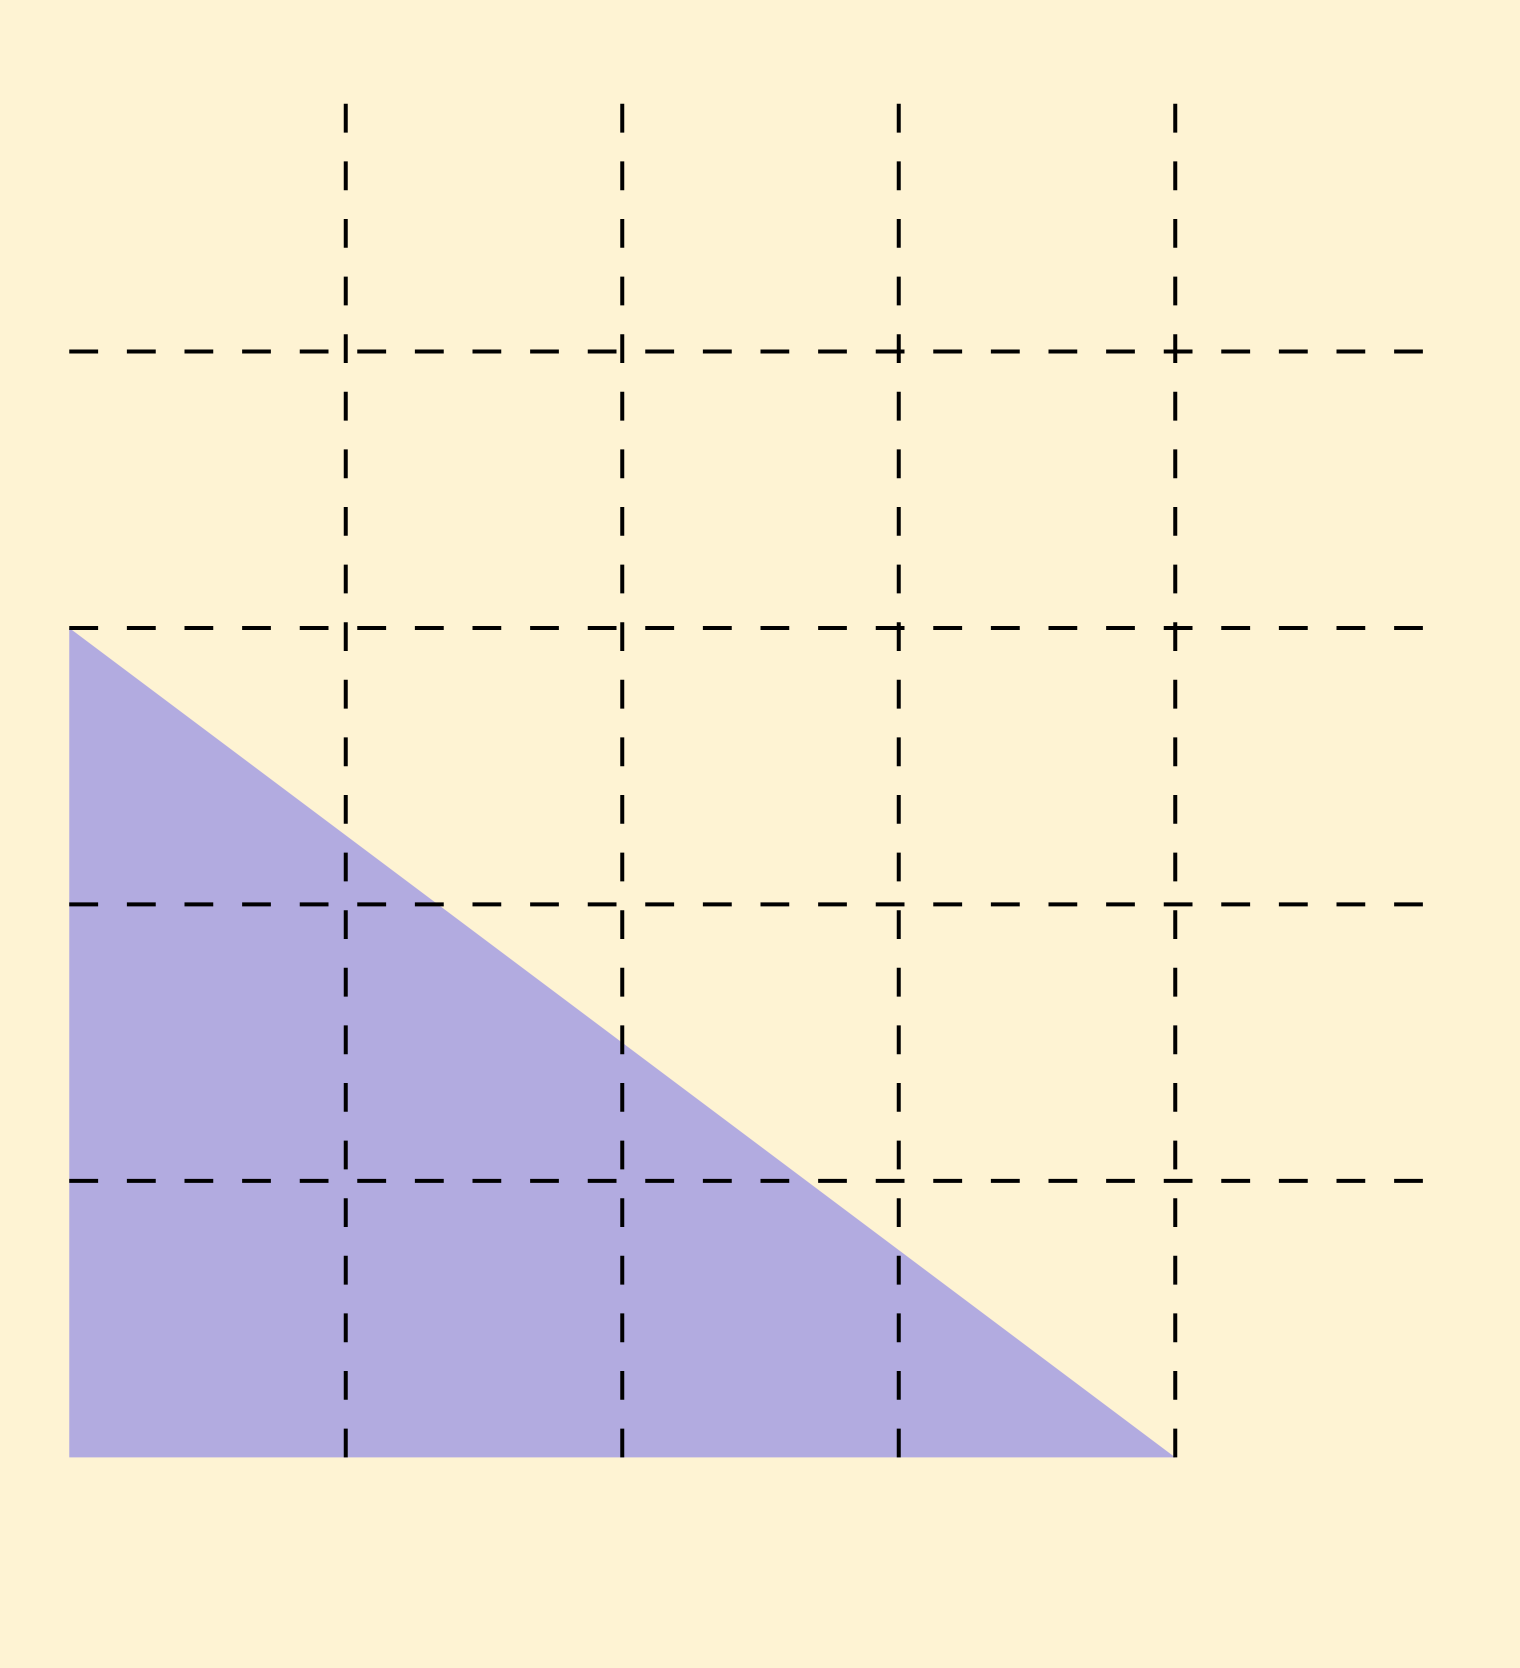 Animation of the Proof